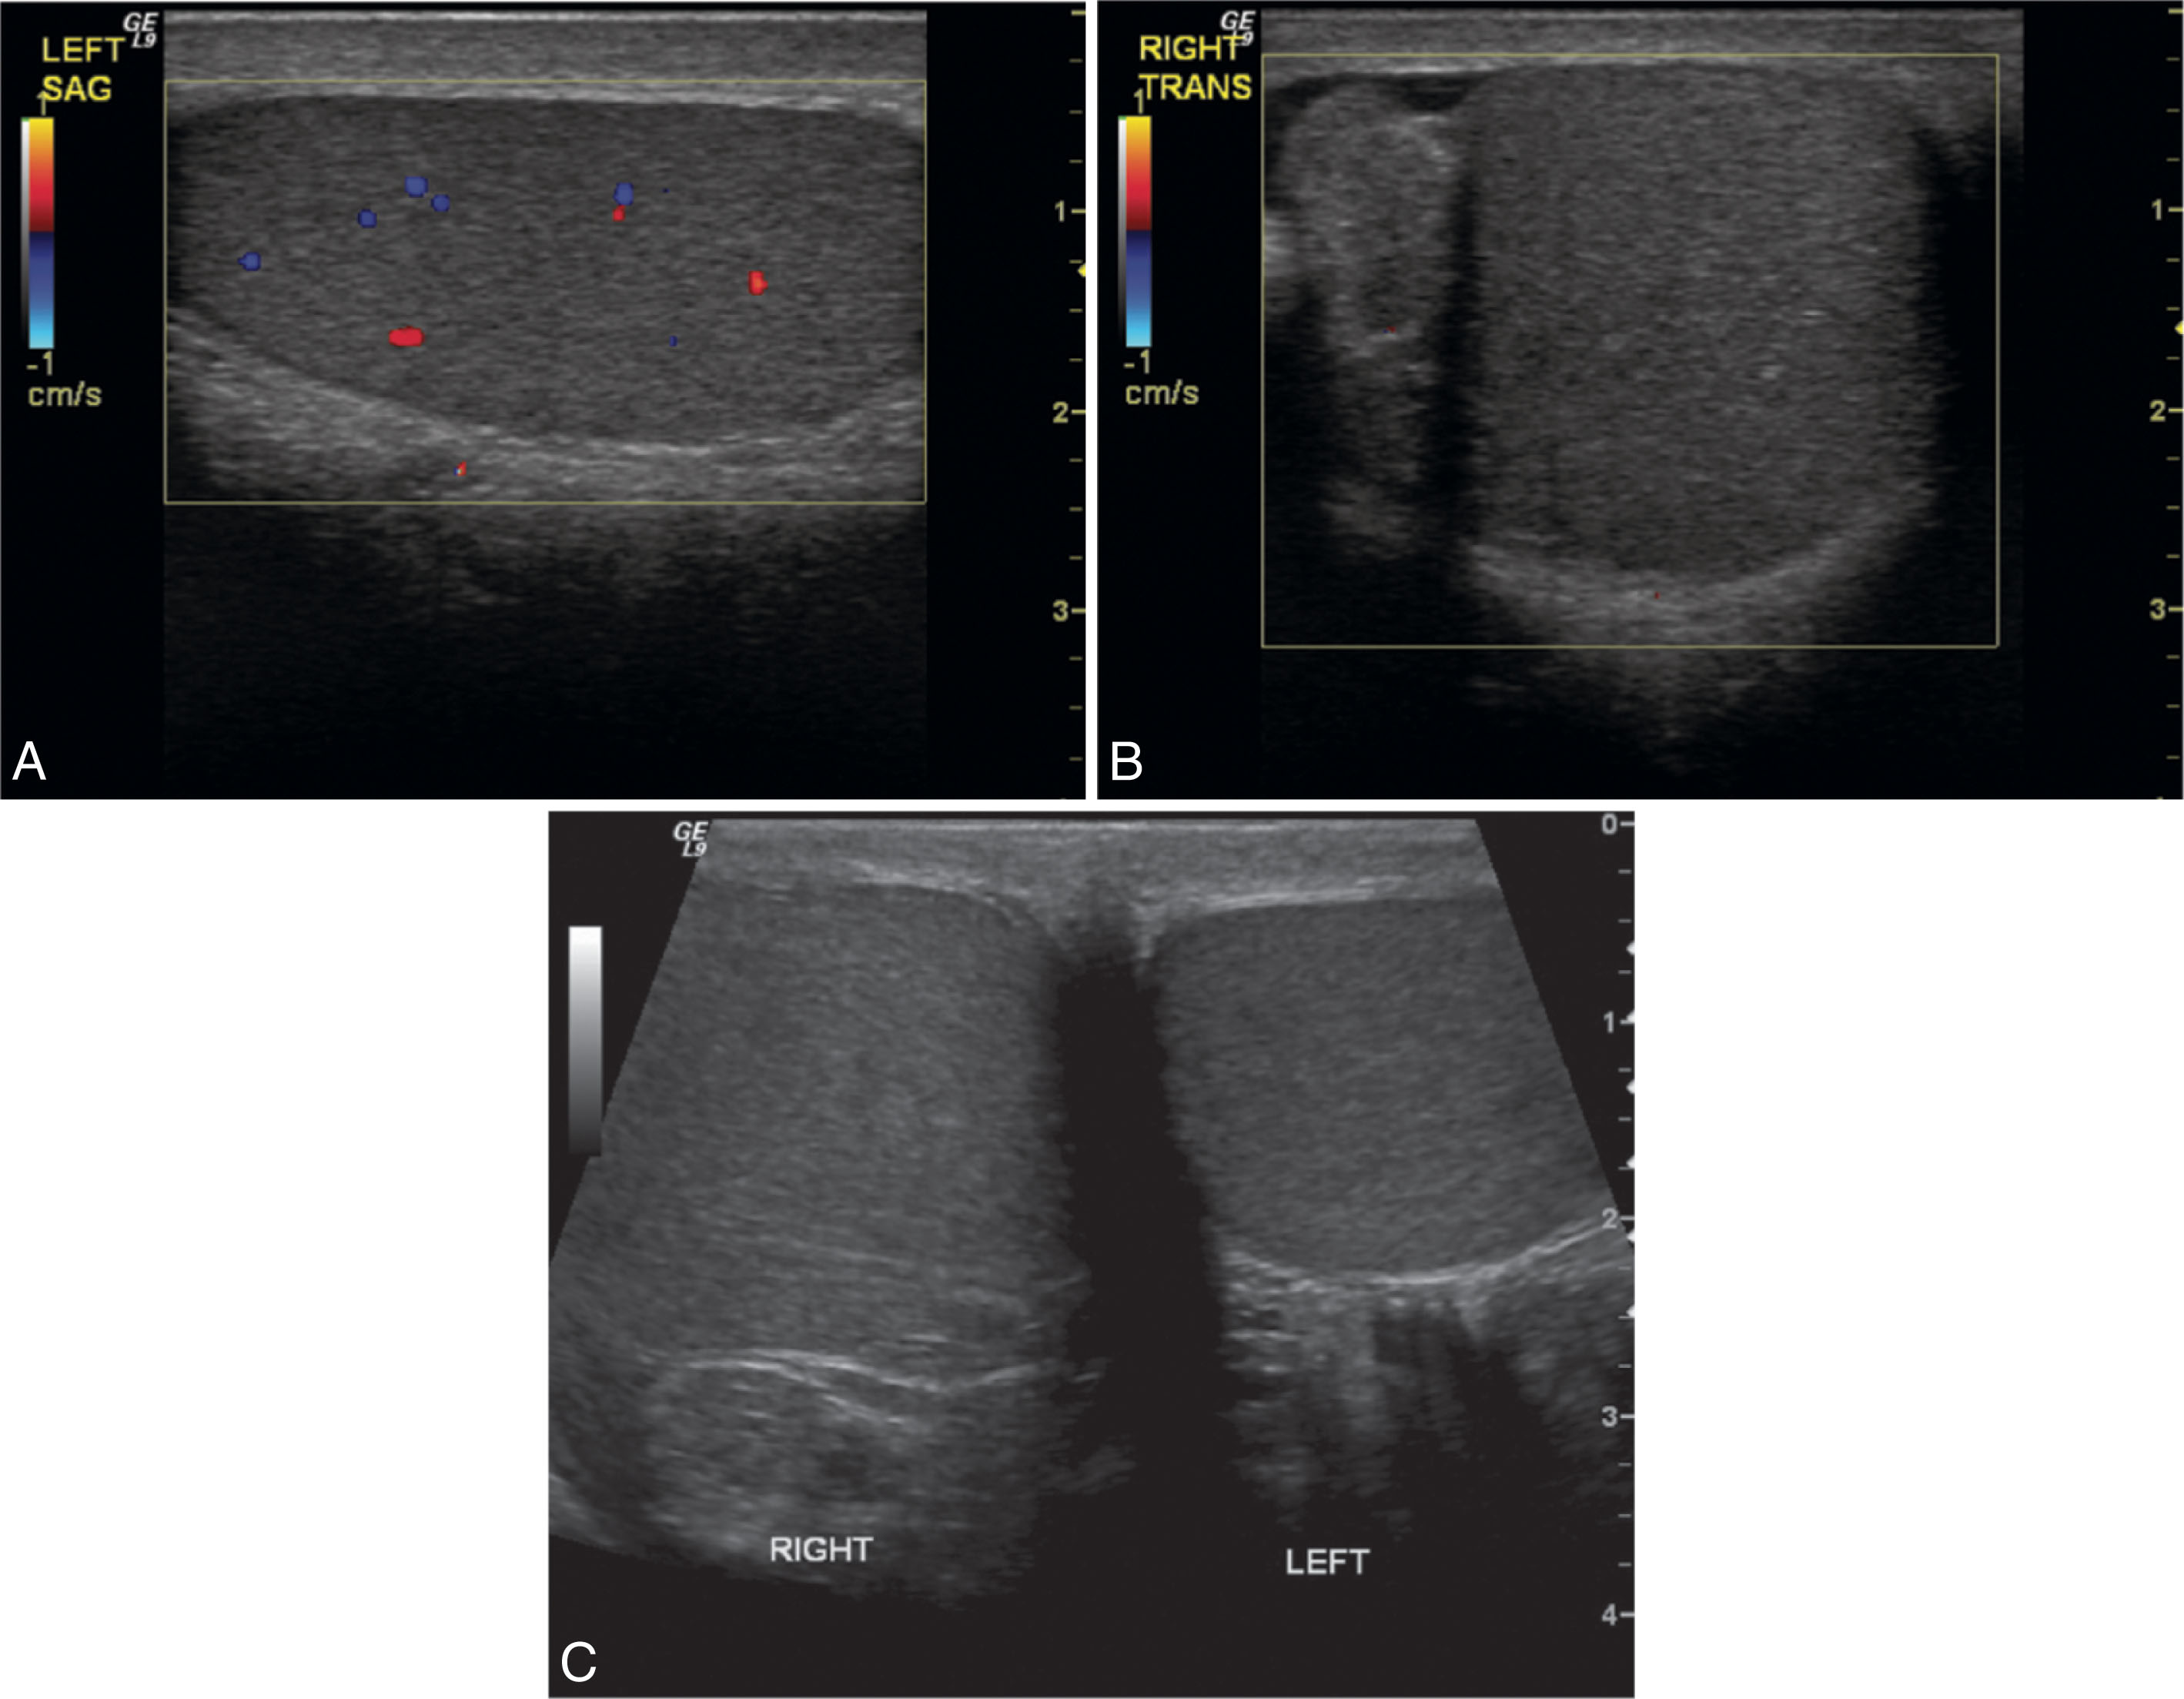 Fig. 23.18, Testicular torsion in an adolescent patient with sudden onset of right testicular pain, accompanied by nausea and vomiting. (A) Color Doppler shows normal flow within the parenchyma of the left testis. (B) The right testis and epididymis are avascular with color Doppler imaging, with the same settings used to show flow on the asymptomatic side. (C) Transverse ultrasound image showing both testes in right testicular torsion. The right testis is swollen and hyperechoic compared with the normal left testis.